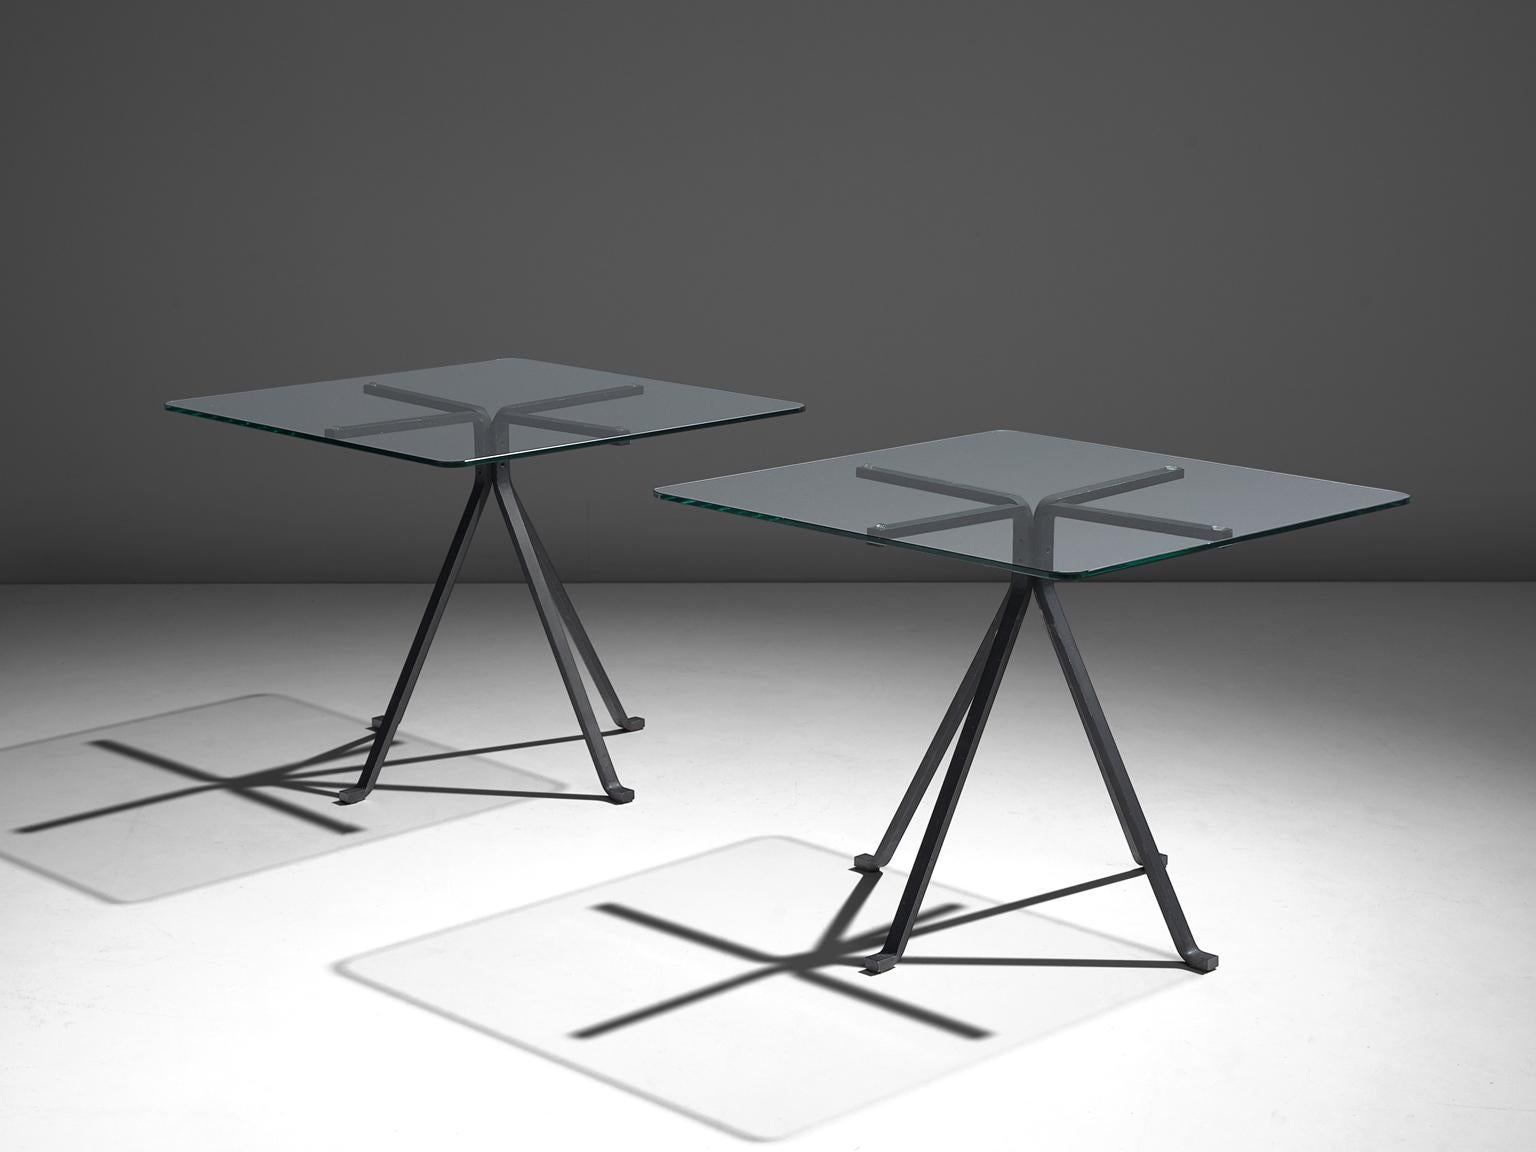 Enzo Mari for Driade, 'Cuginetto' side tables, glass, painted steel, Italy, 1970s.

This set of coffee tables 'Cuginetto' are designed by Enzo Mari (1932-2020) and manufactured by Driade. They feature a black steel base out of four apart legs which